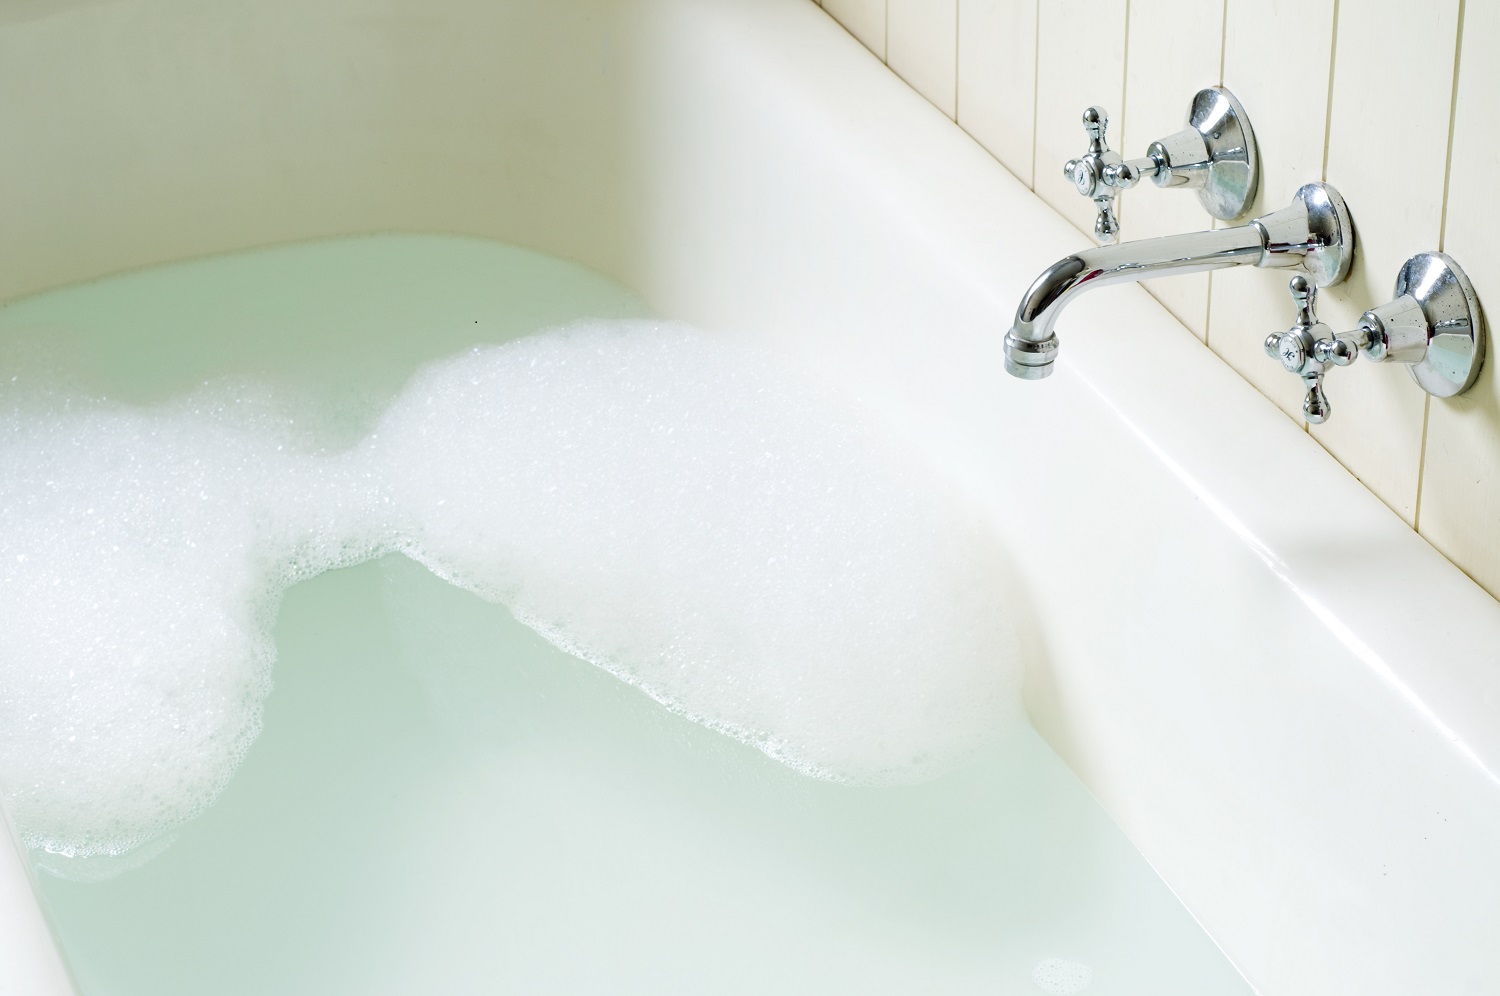 How To Get Rid Of Bubbles In Bathtub